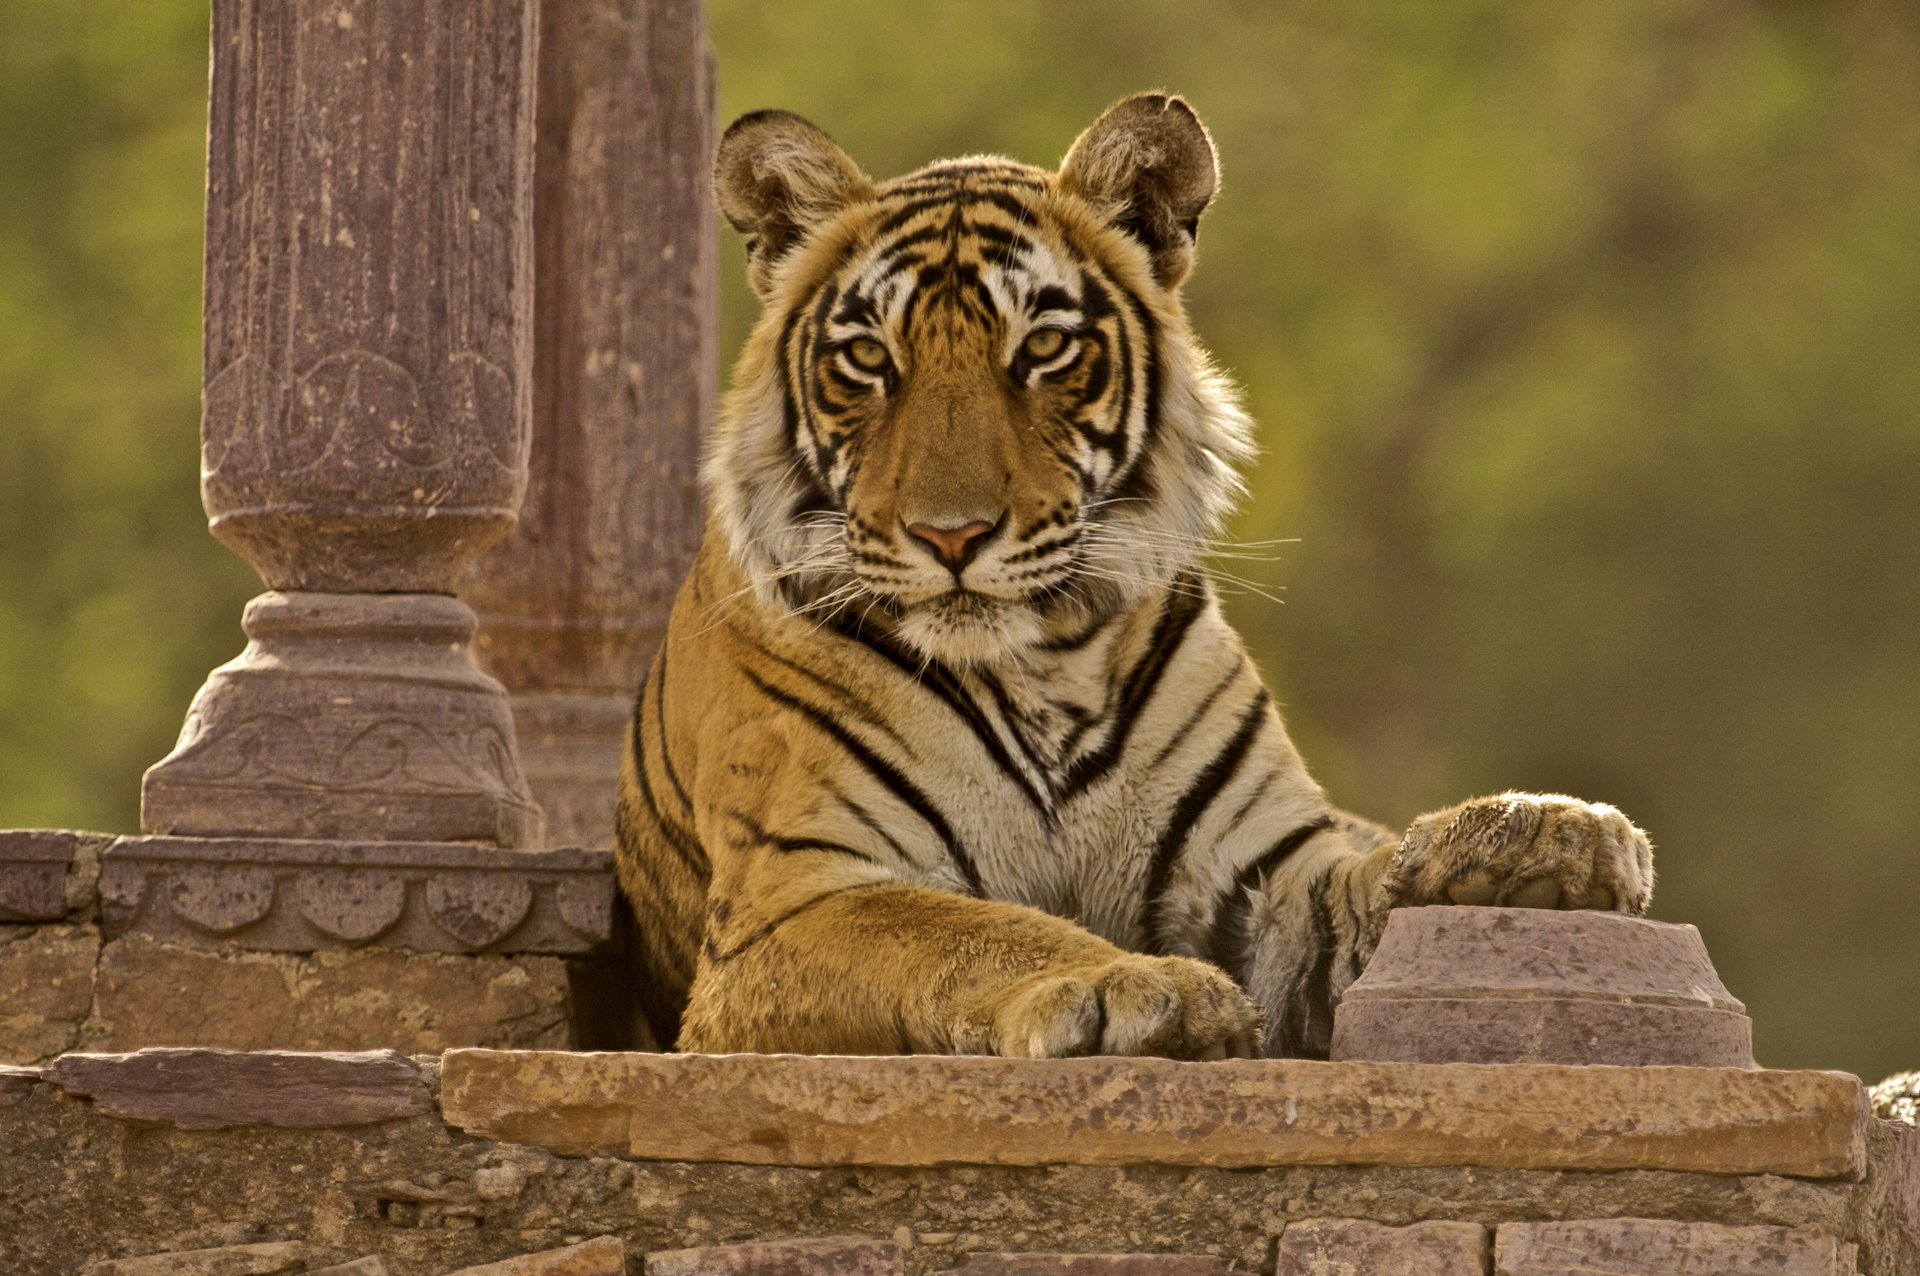 Tiger sitting in a chattri or ruined palace in Ranthambore National Park, Rajasthan, India